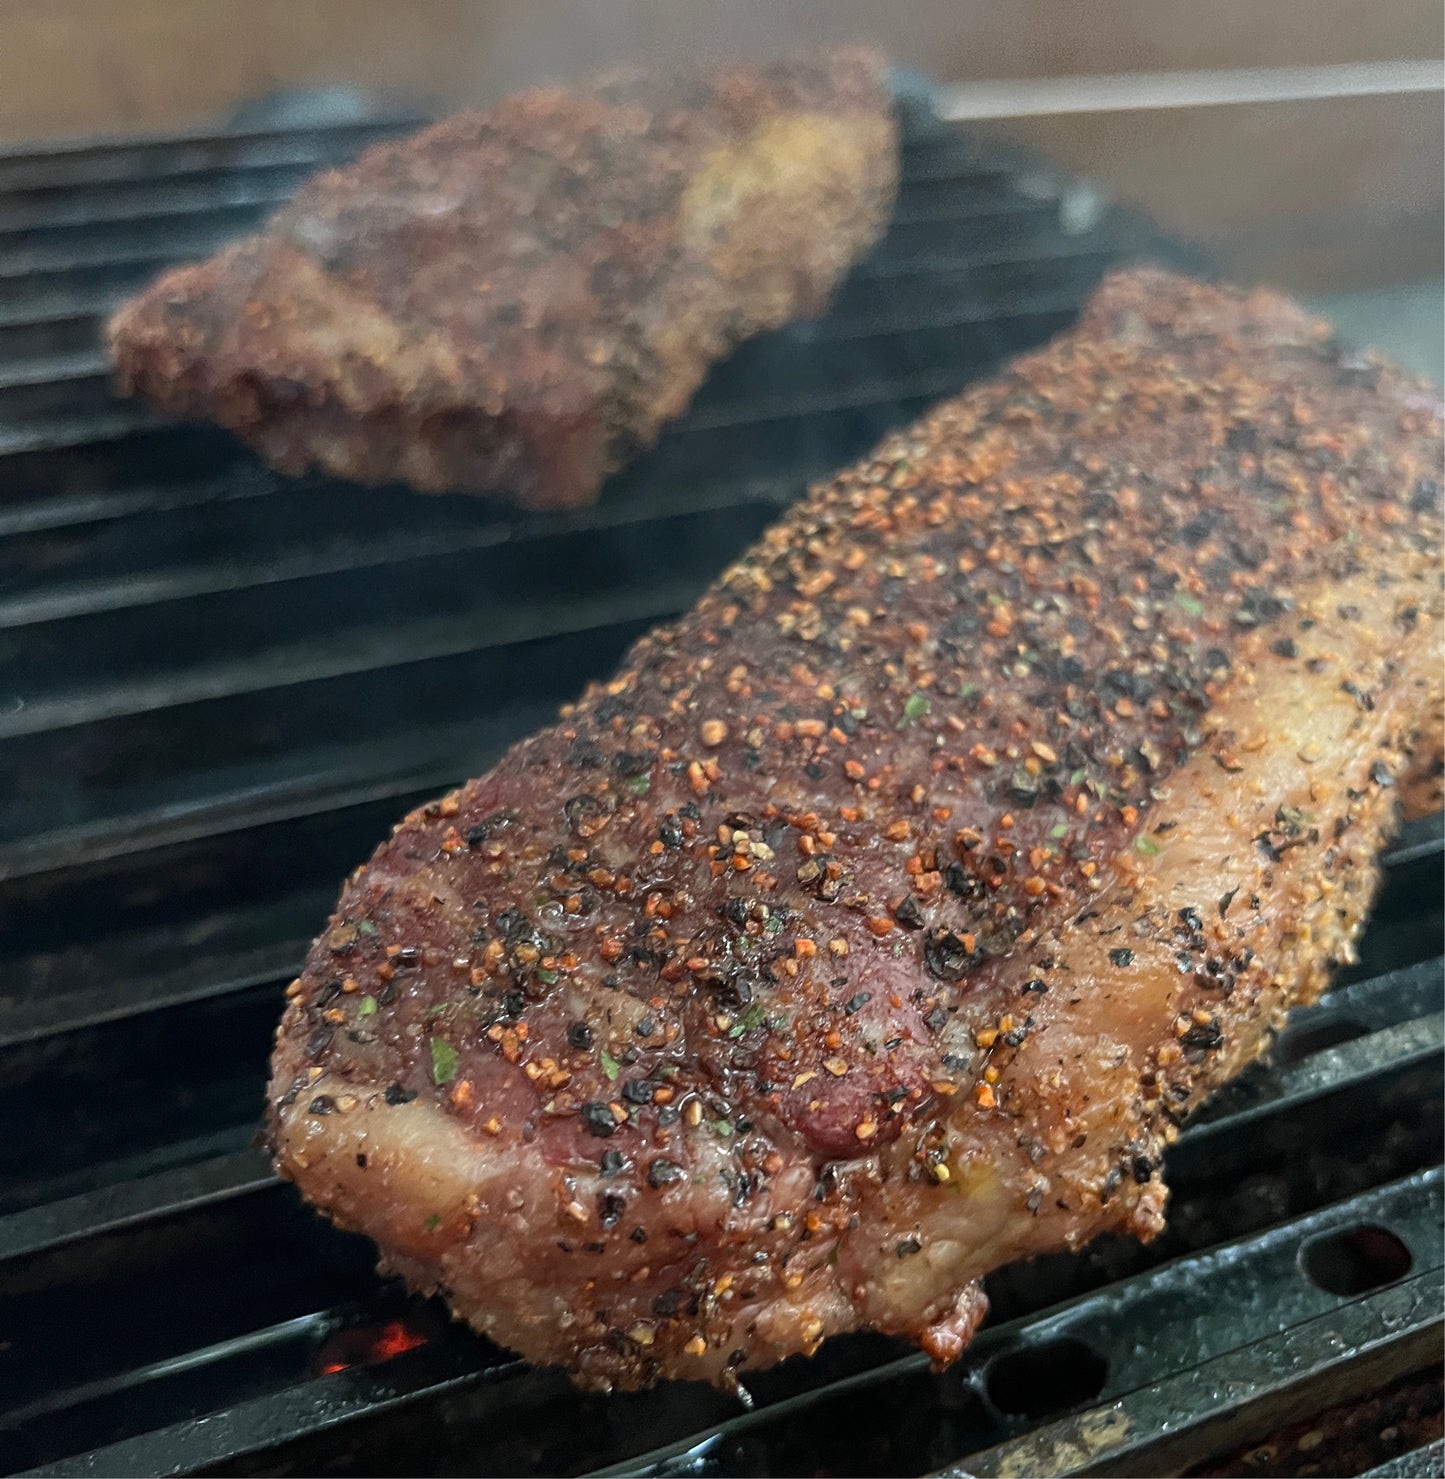 Two juicy steaks seasoned with Meat Church Holy Cow rub, sizzling on a grill grate for a Weber gas BBQ, ready to be cooked to perfection